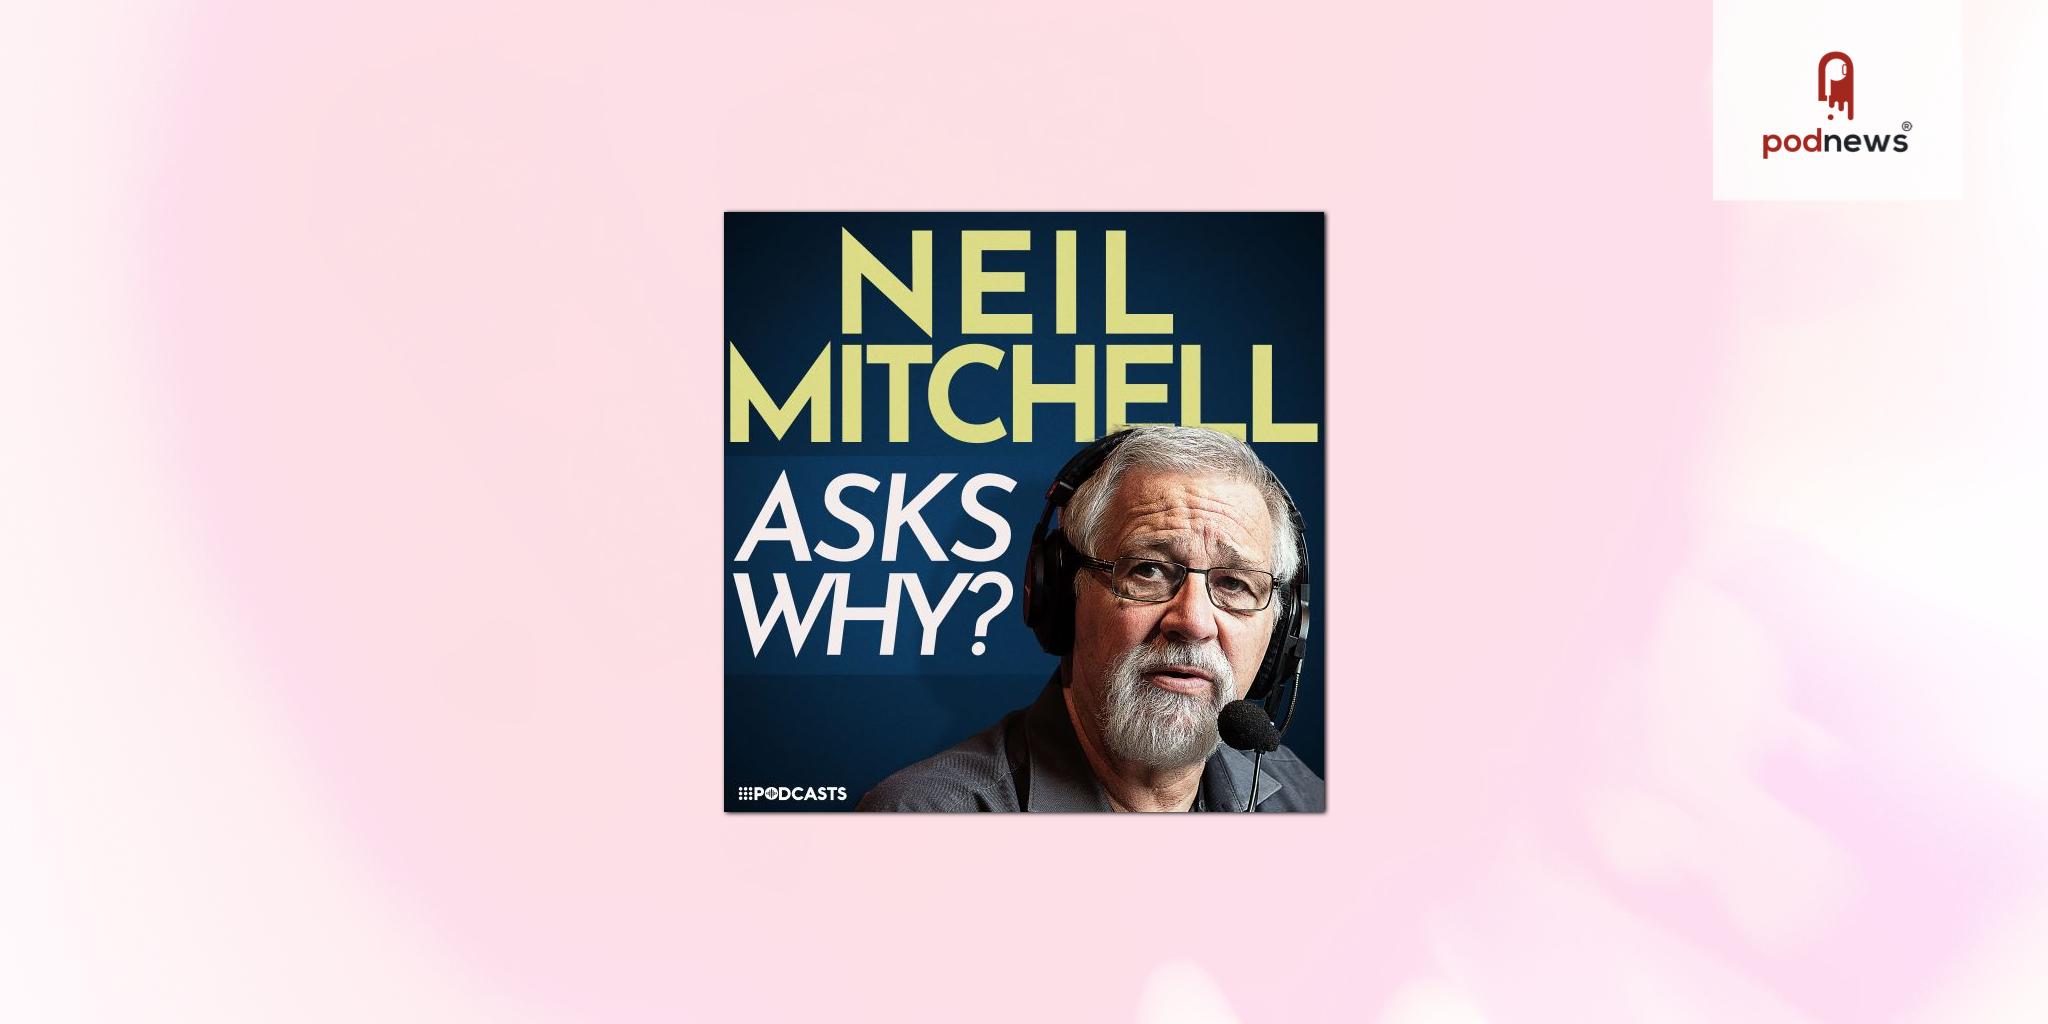 Respected broadcaster Neil Mitchell 'Asks Why?' in new podcast series